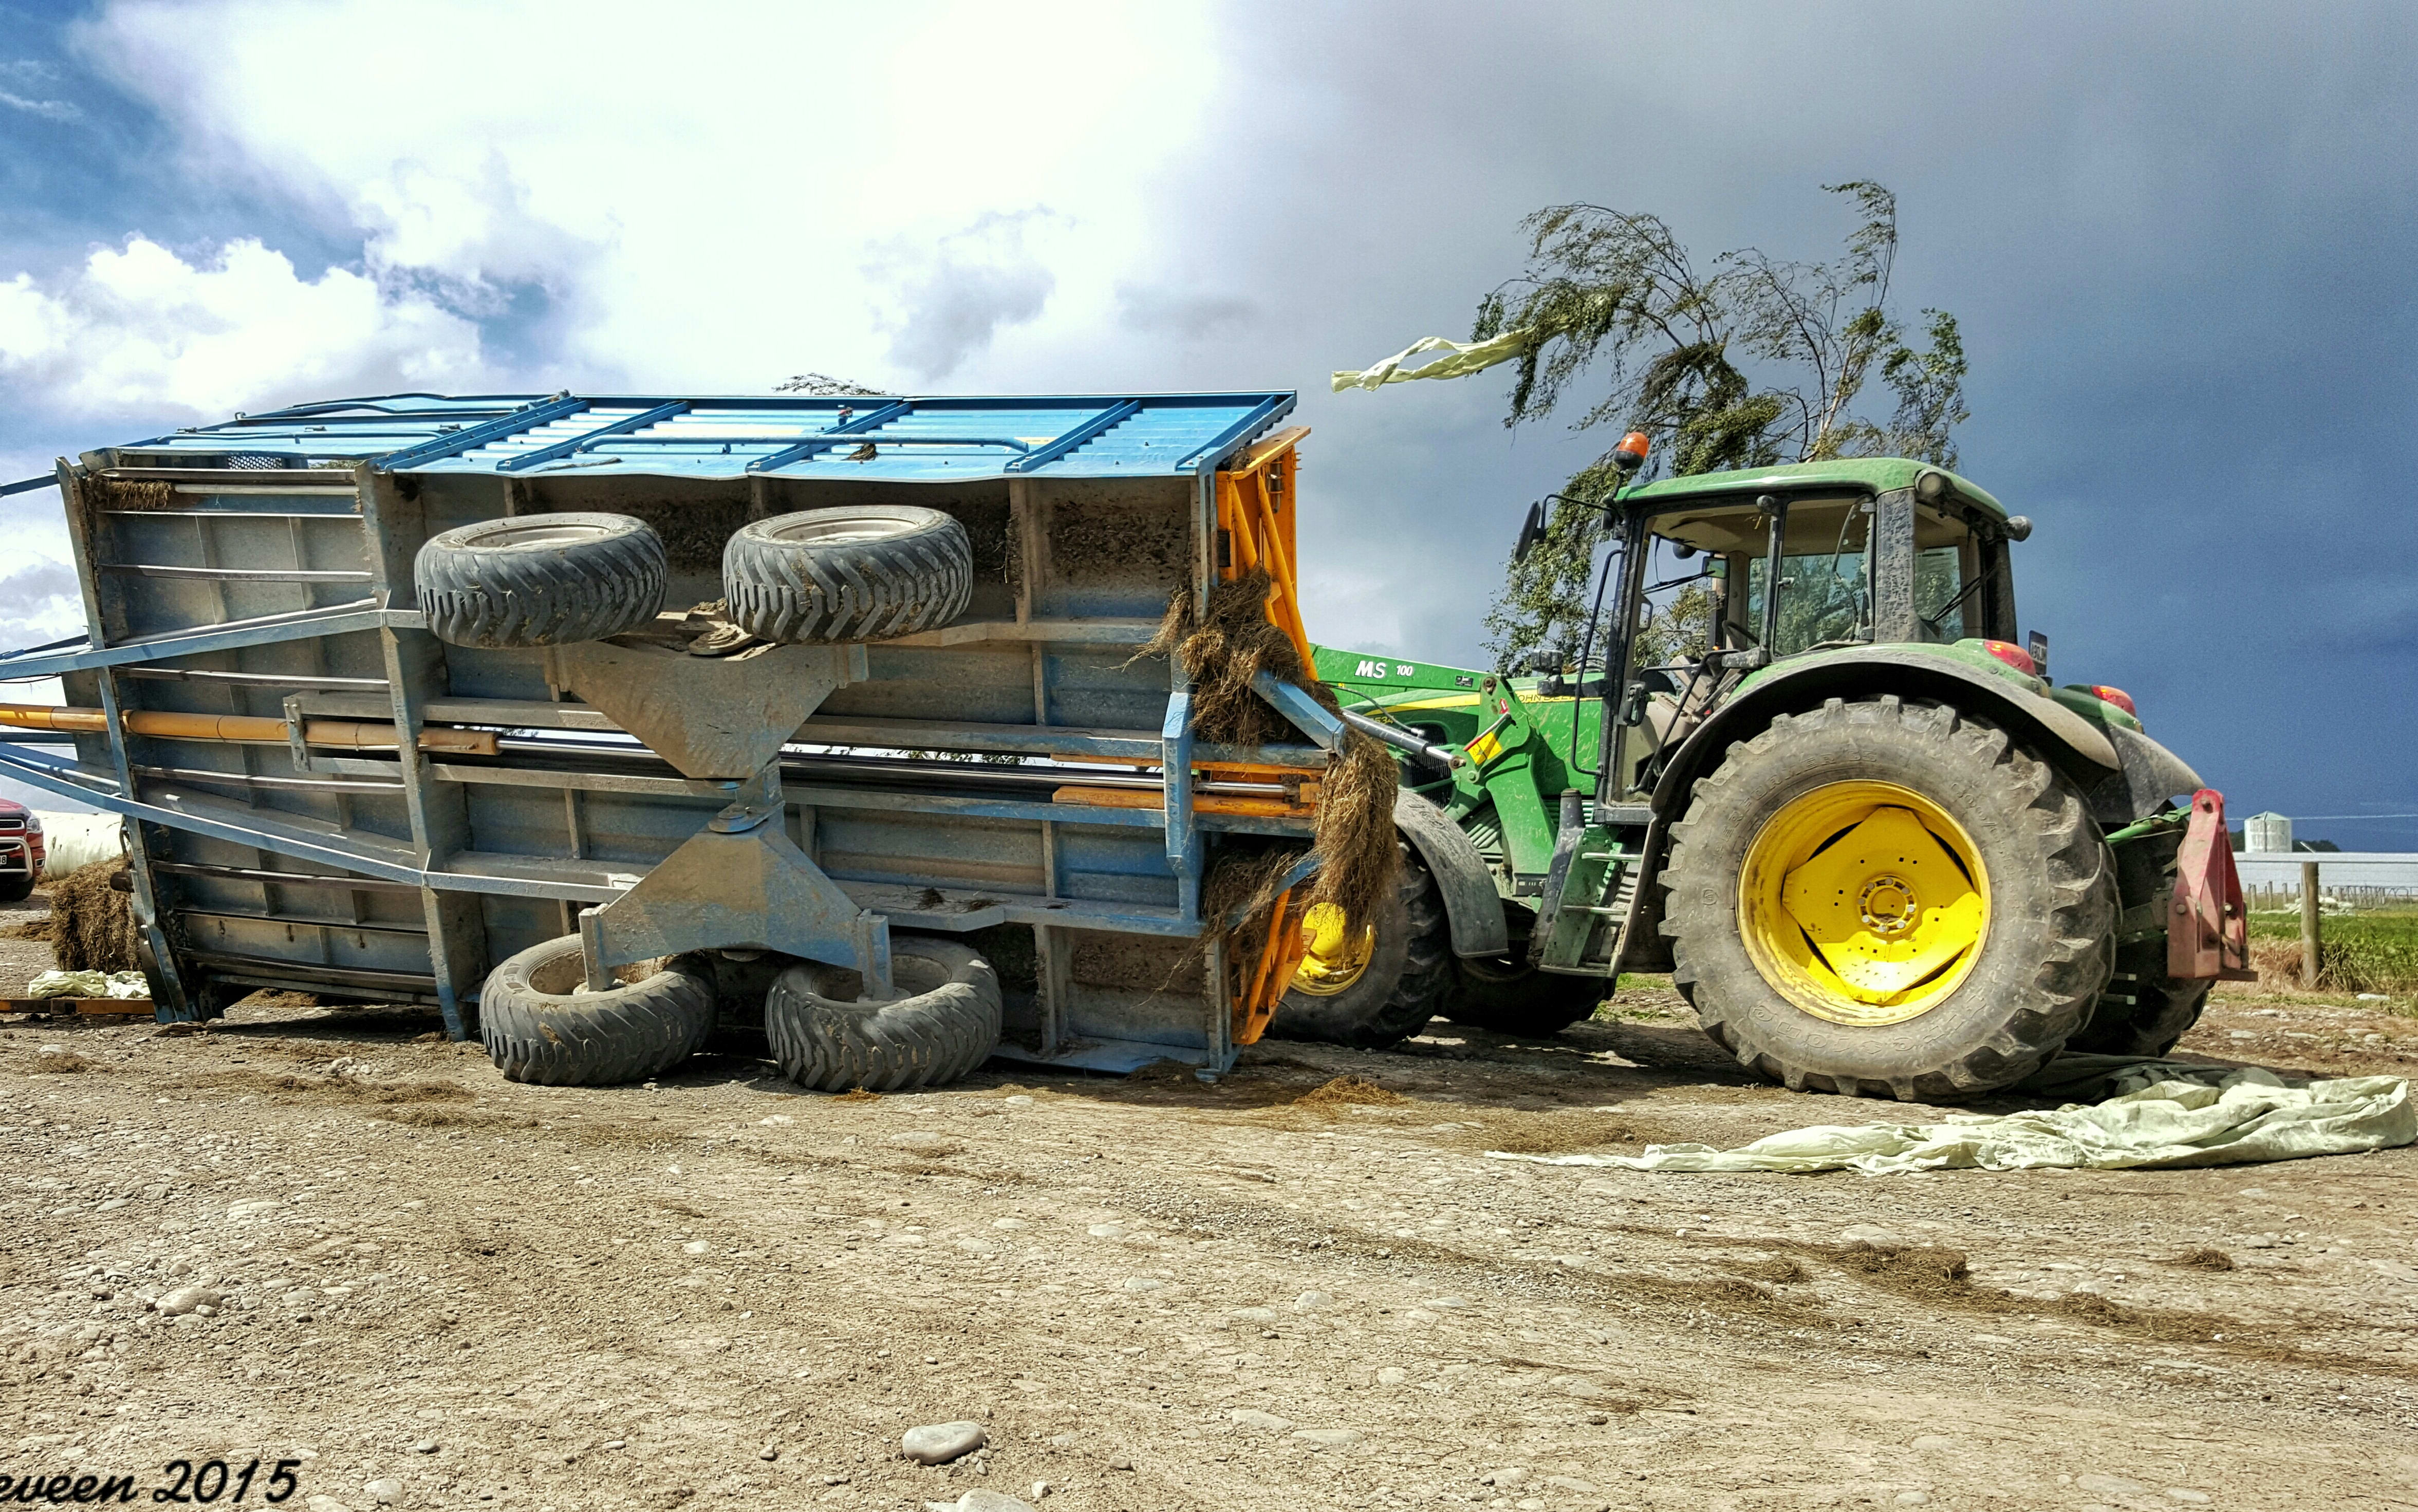 The tornado flipped over Casey Sparrow's silage wagon